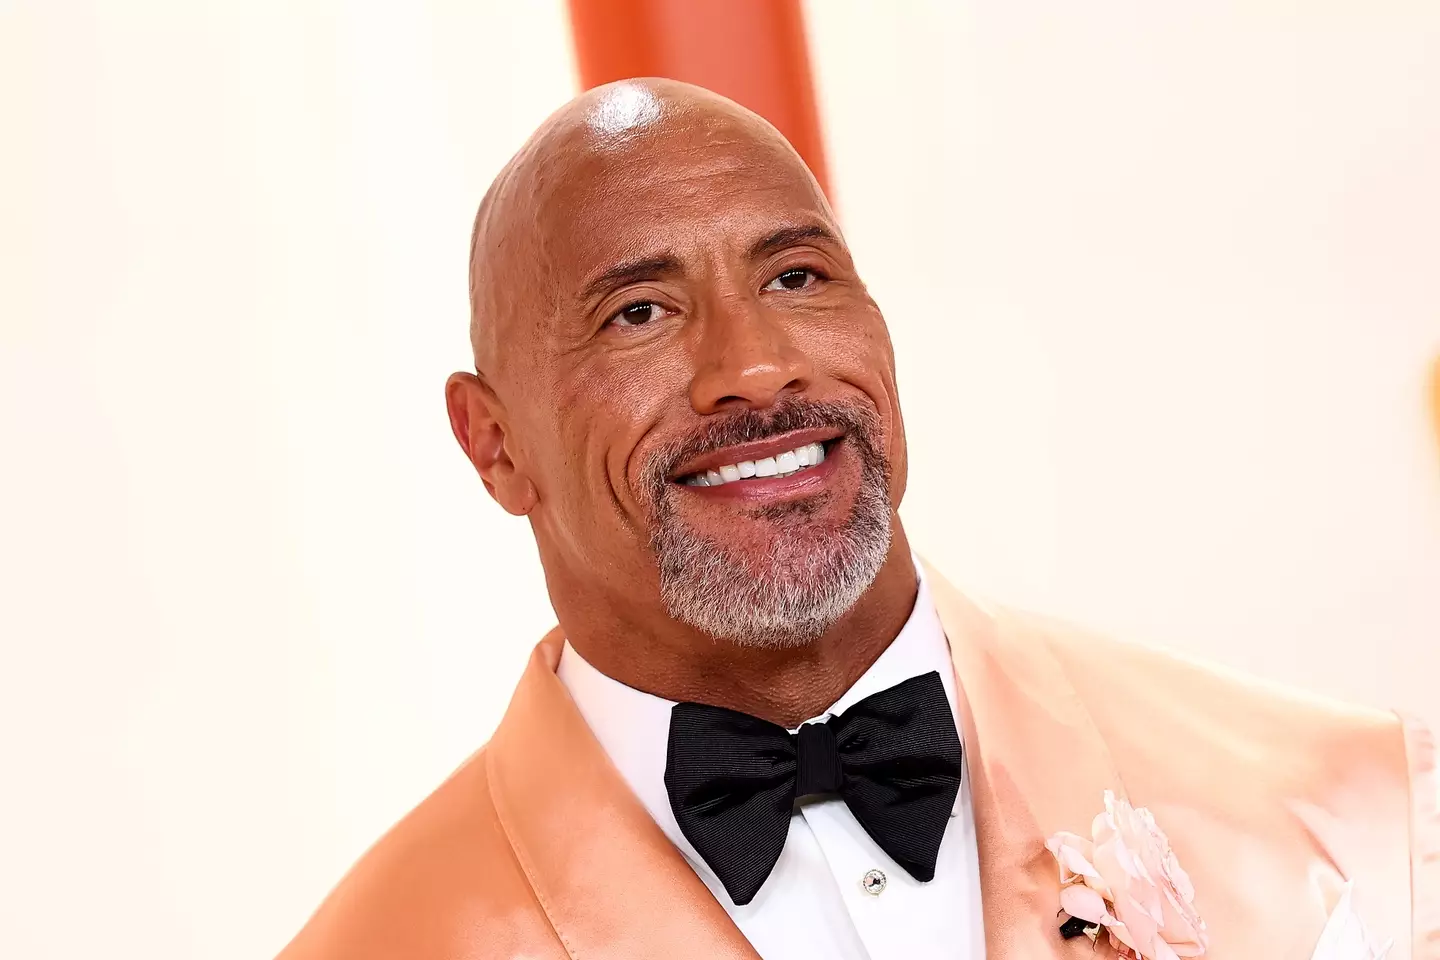 The Rock has responded to the wax work.